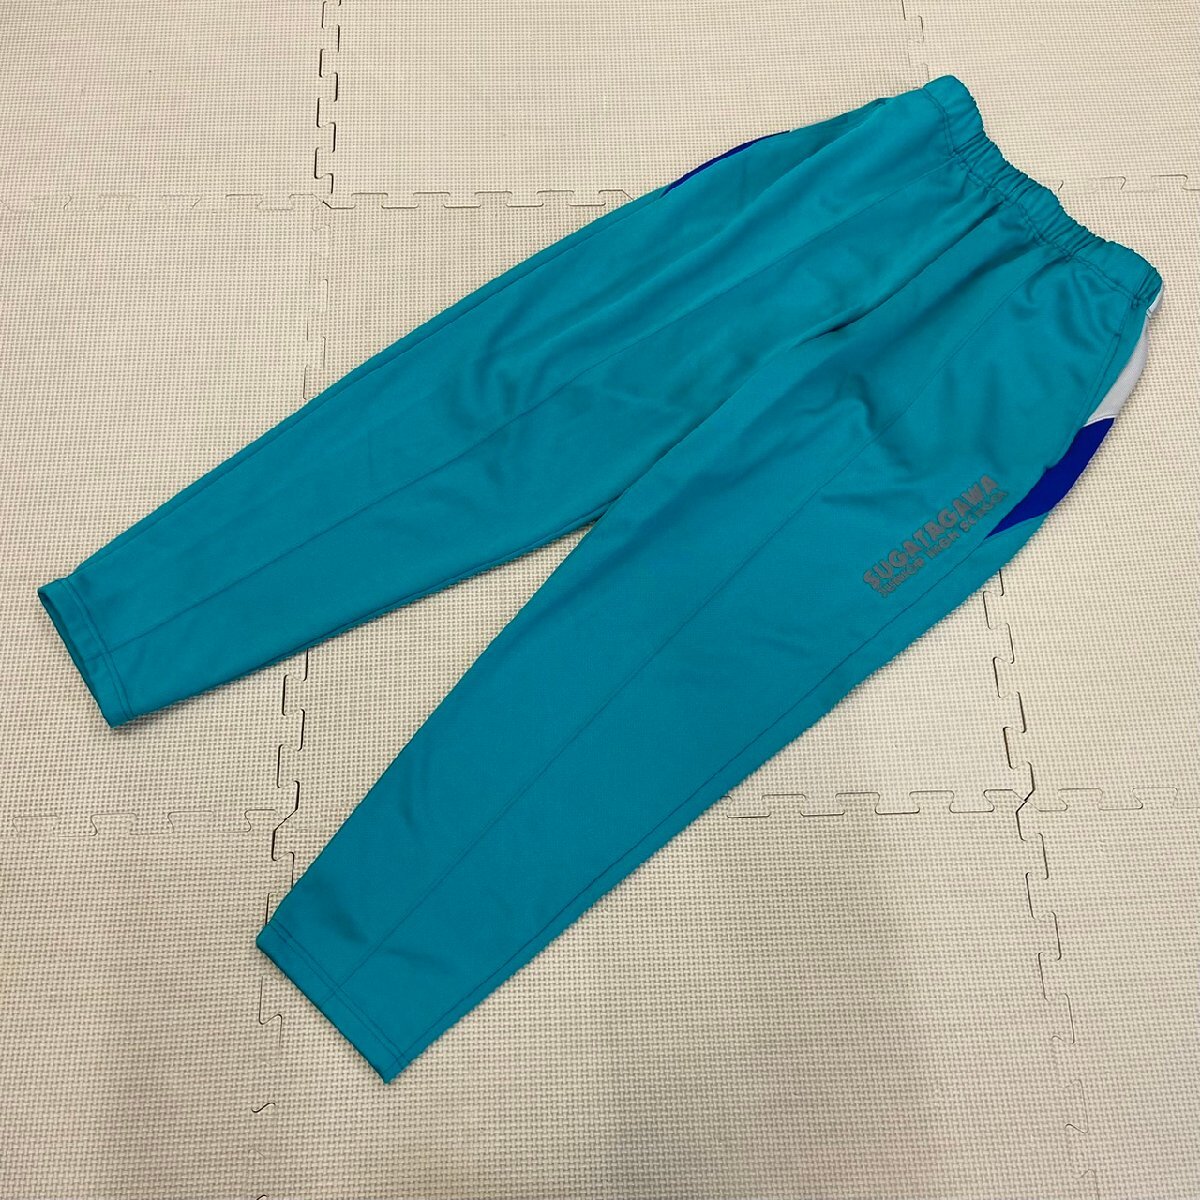 Y600/T181( used ) Tochigi prefecture . river junior high school gym uniform 4 point / designation goods /L/LL/ long sleeve /tore shirt / long trousers / shorts / blue green series / jersey / physical training put on / man ./ short period put on 